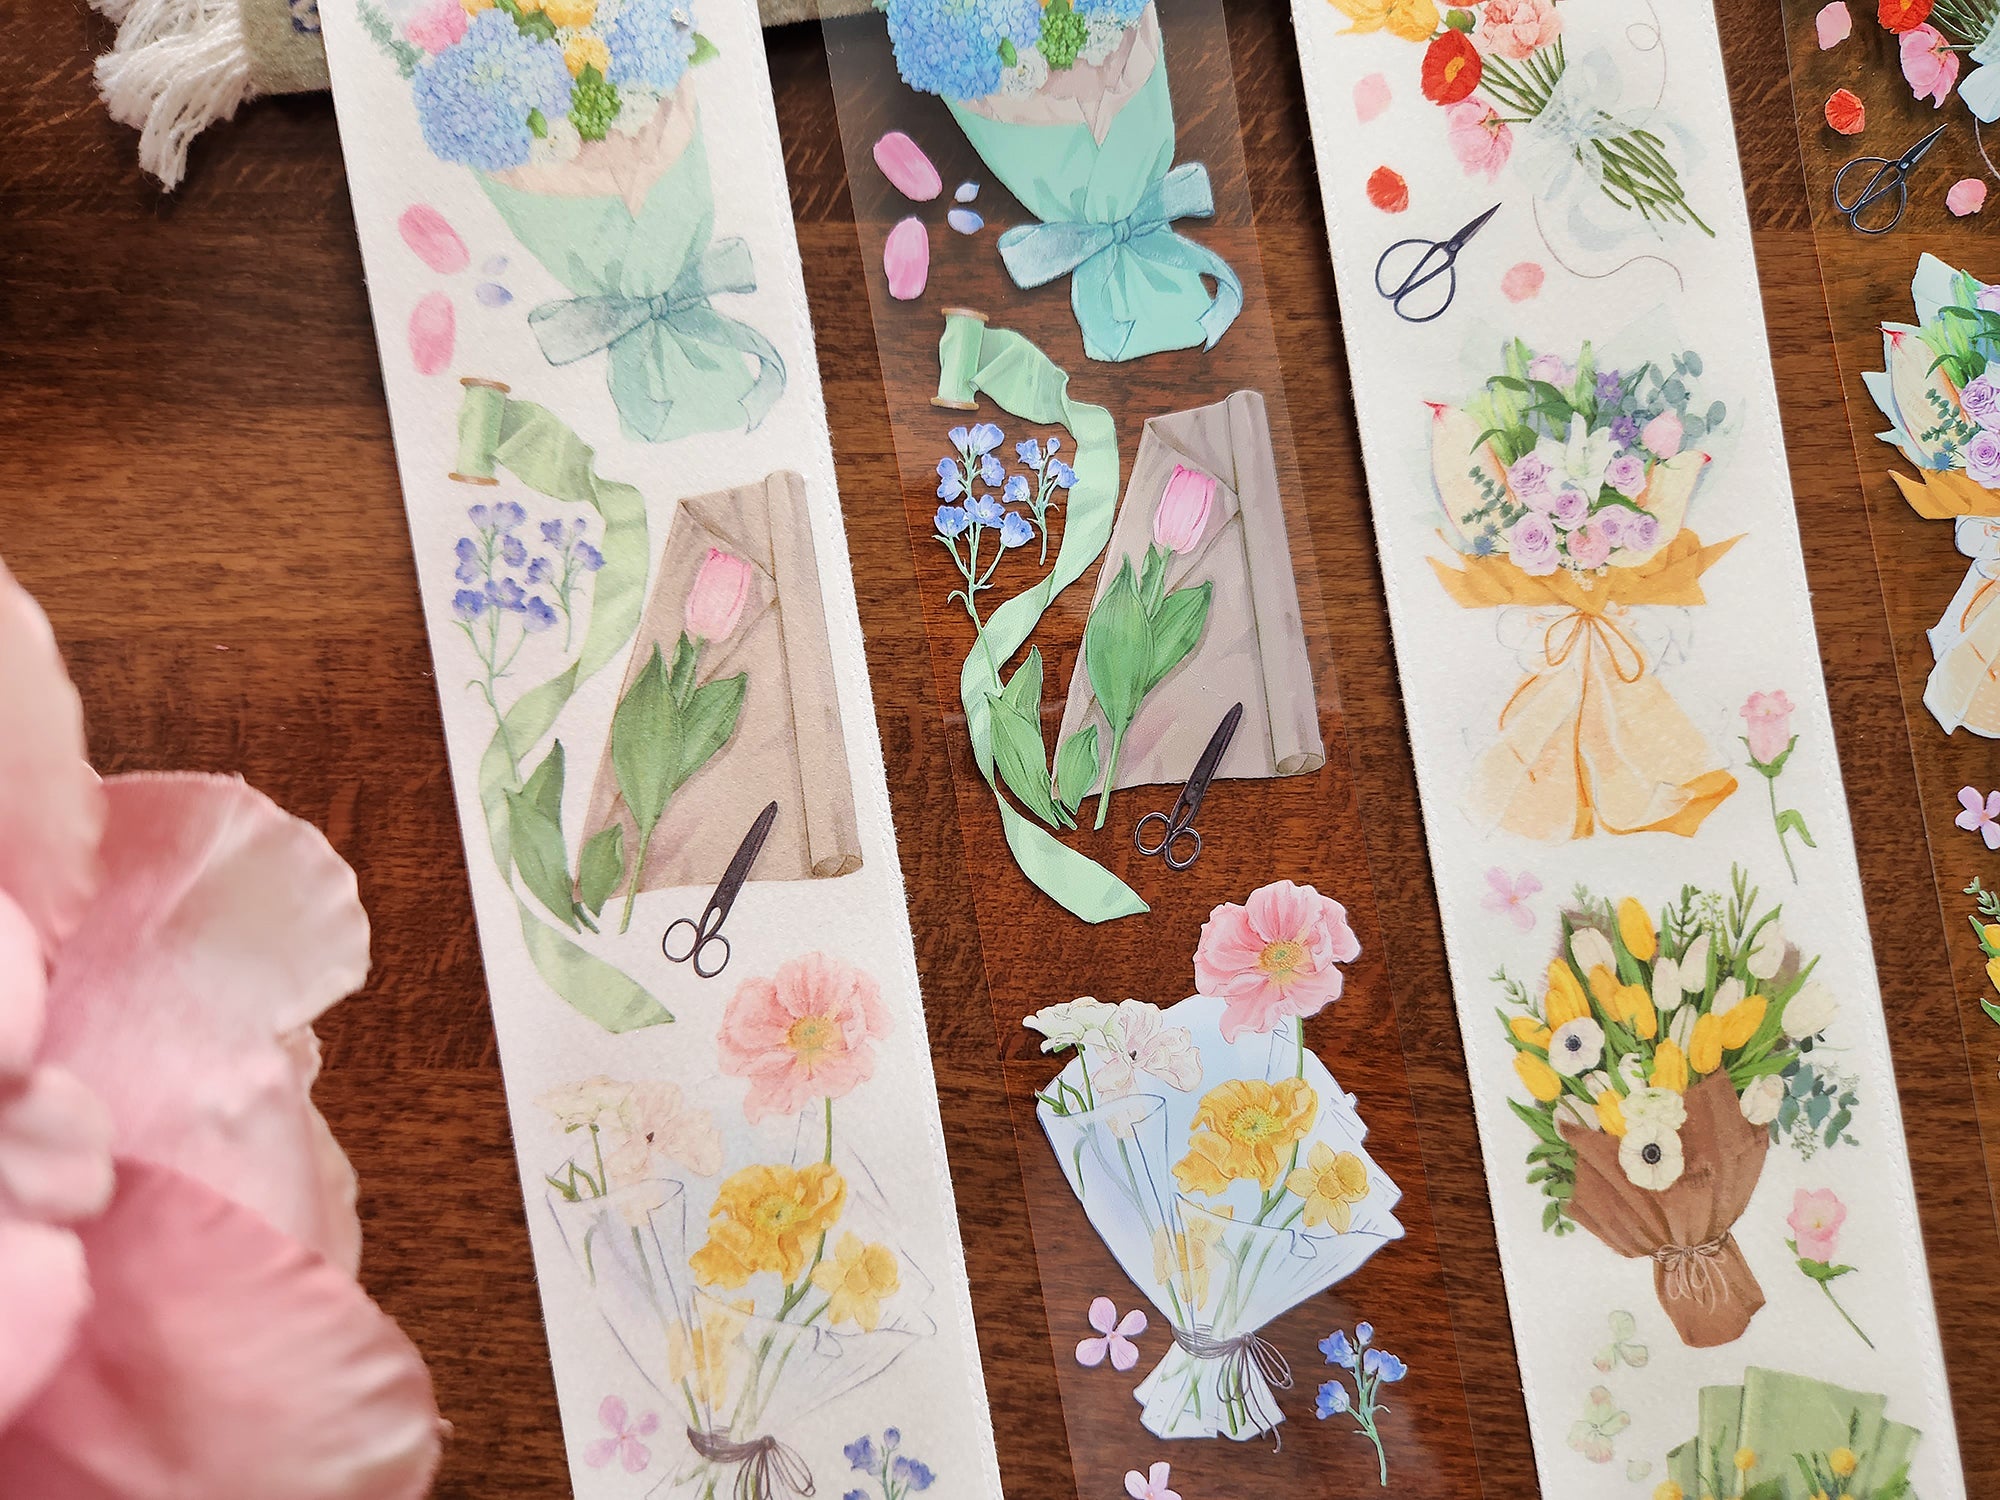 Warm Studio Masking Tape: A Flower for You